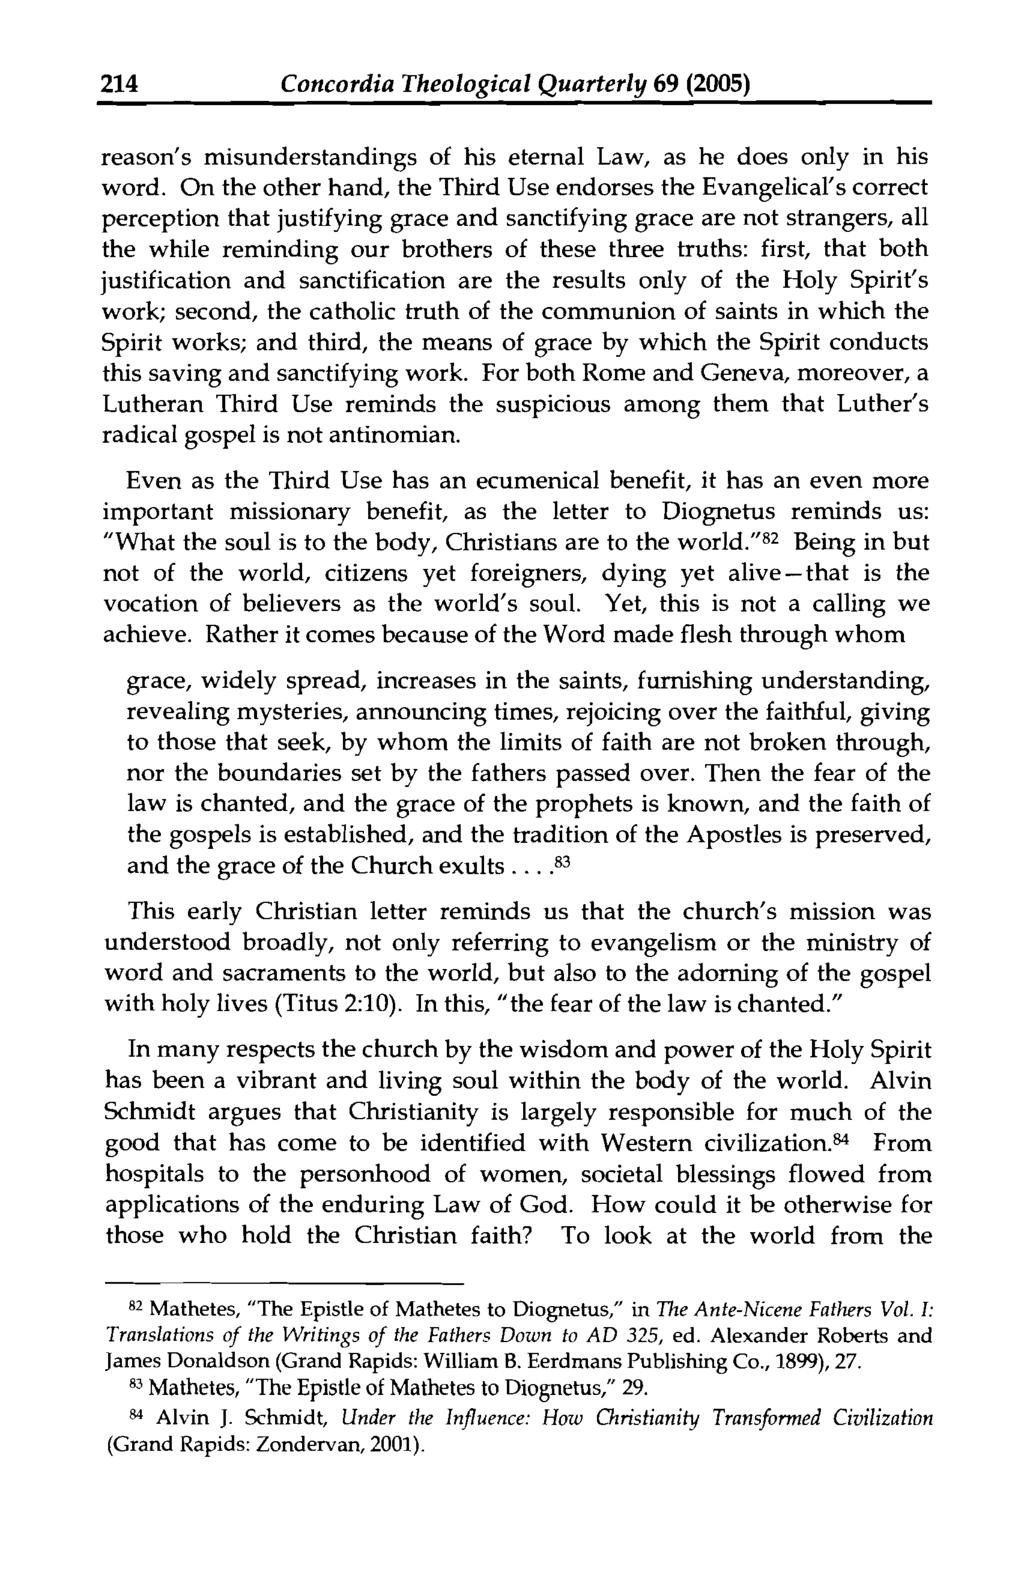 214 Concordia Theological Quarterly 69 (2005) reason's misunderstandings of his eternal Law, as he does only in his word.